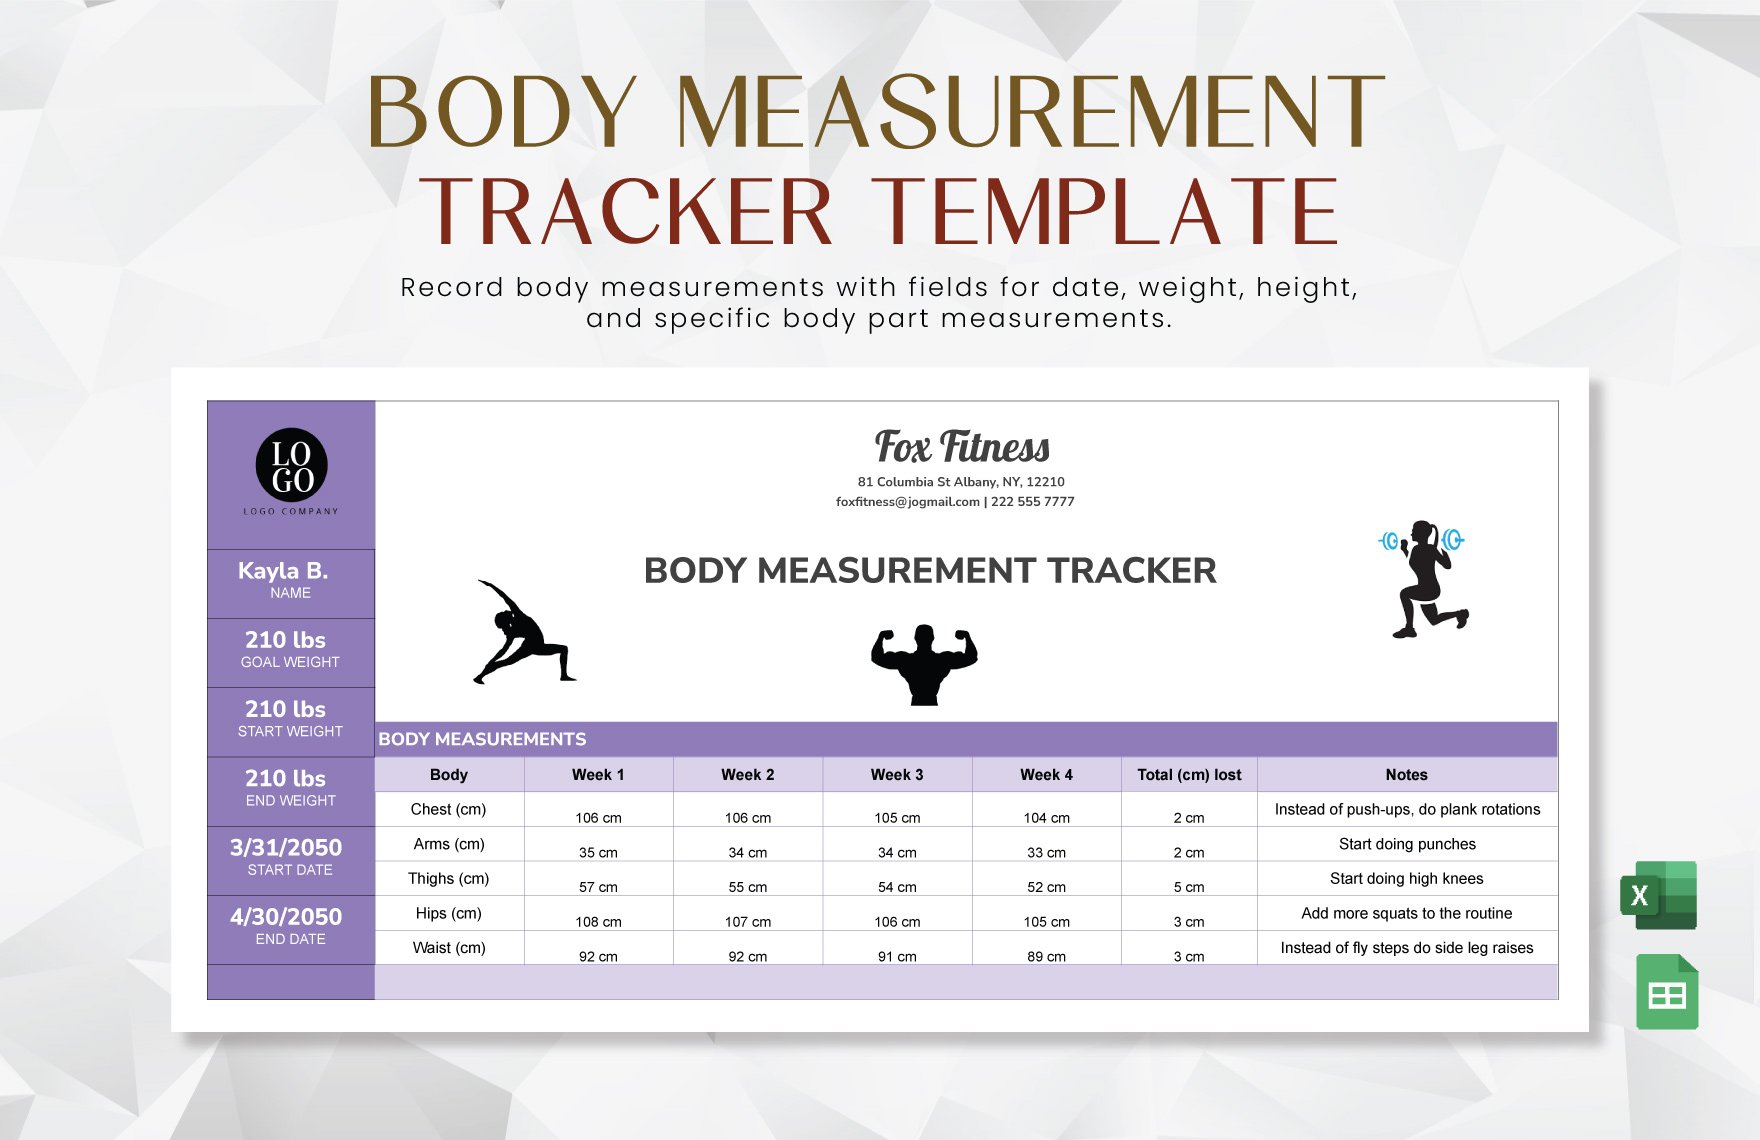 Body Measurement Tracker Template in Excel, Google Sheets